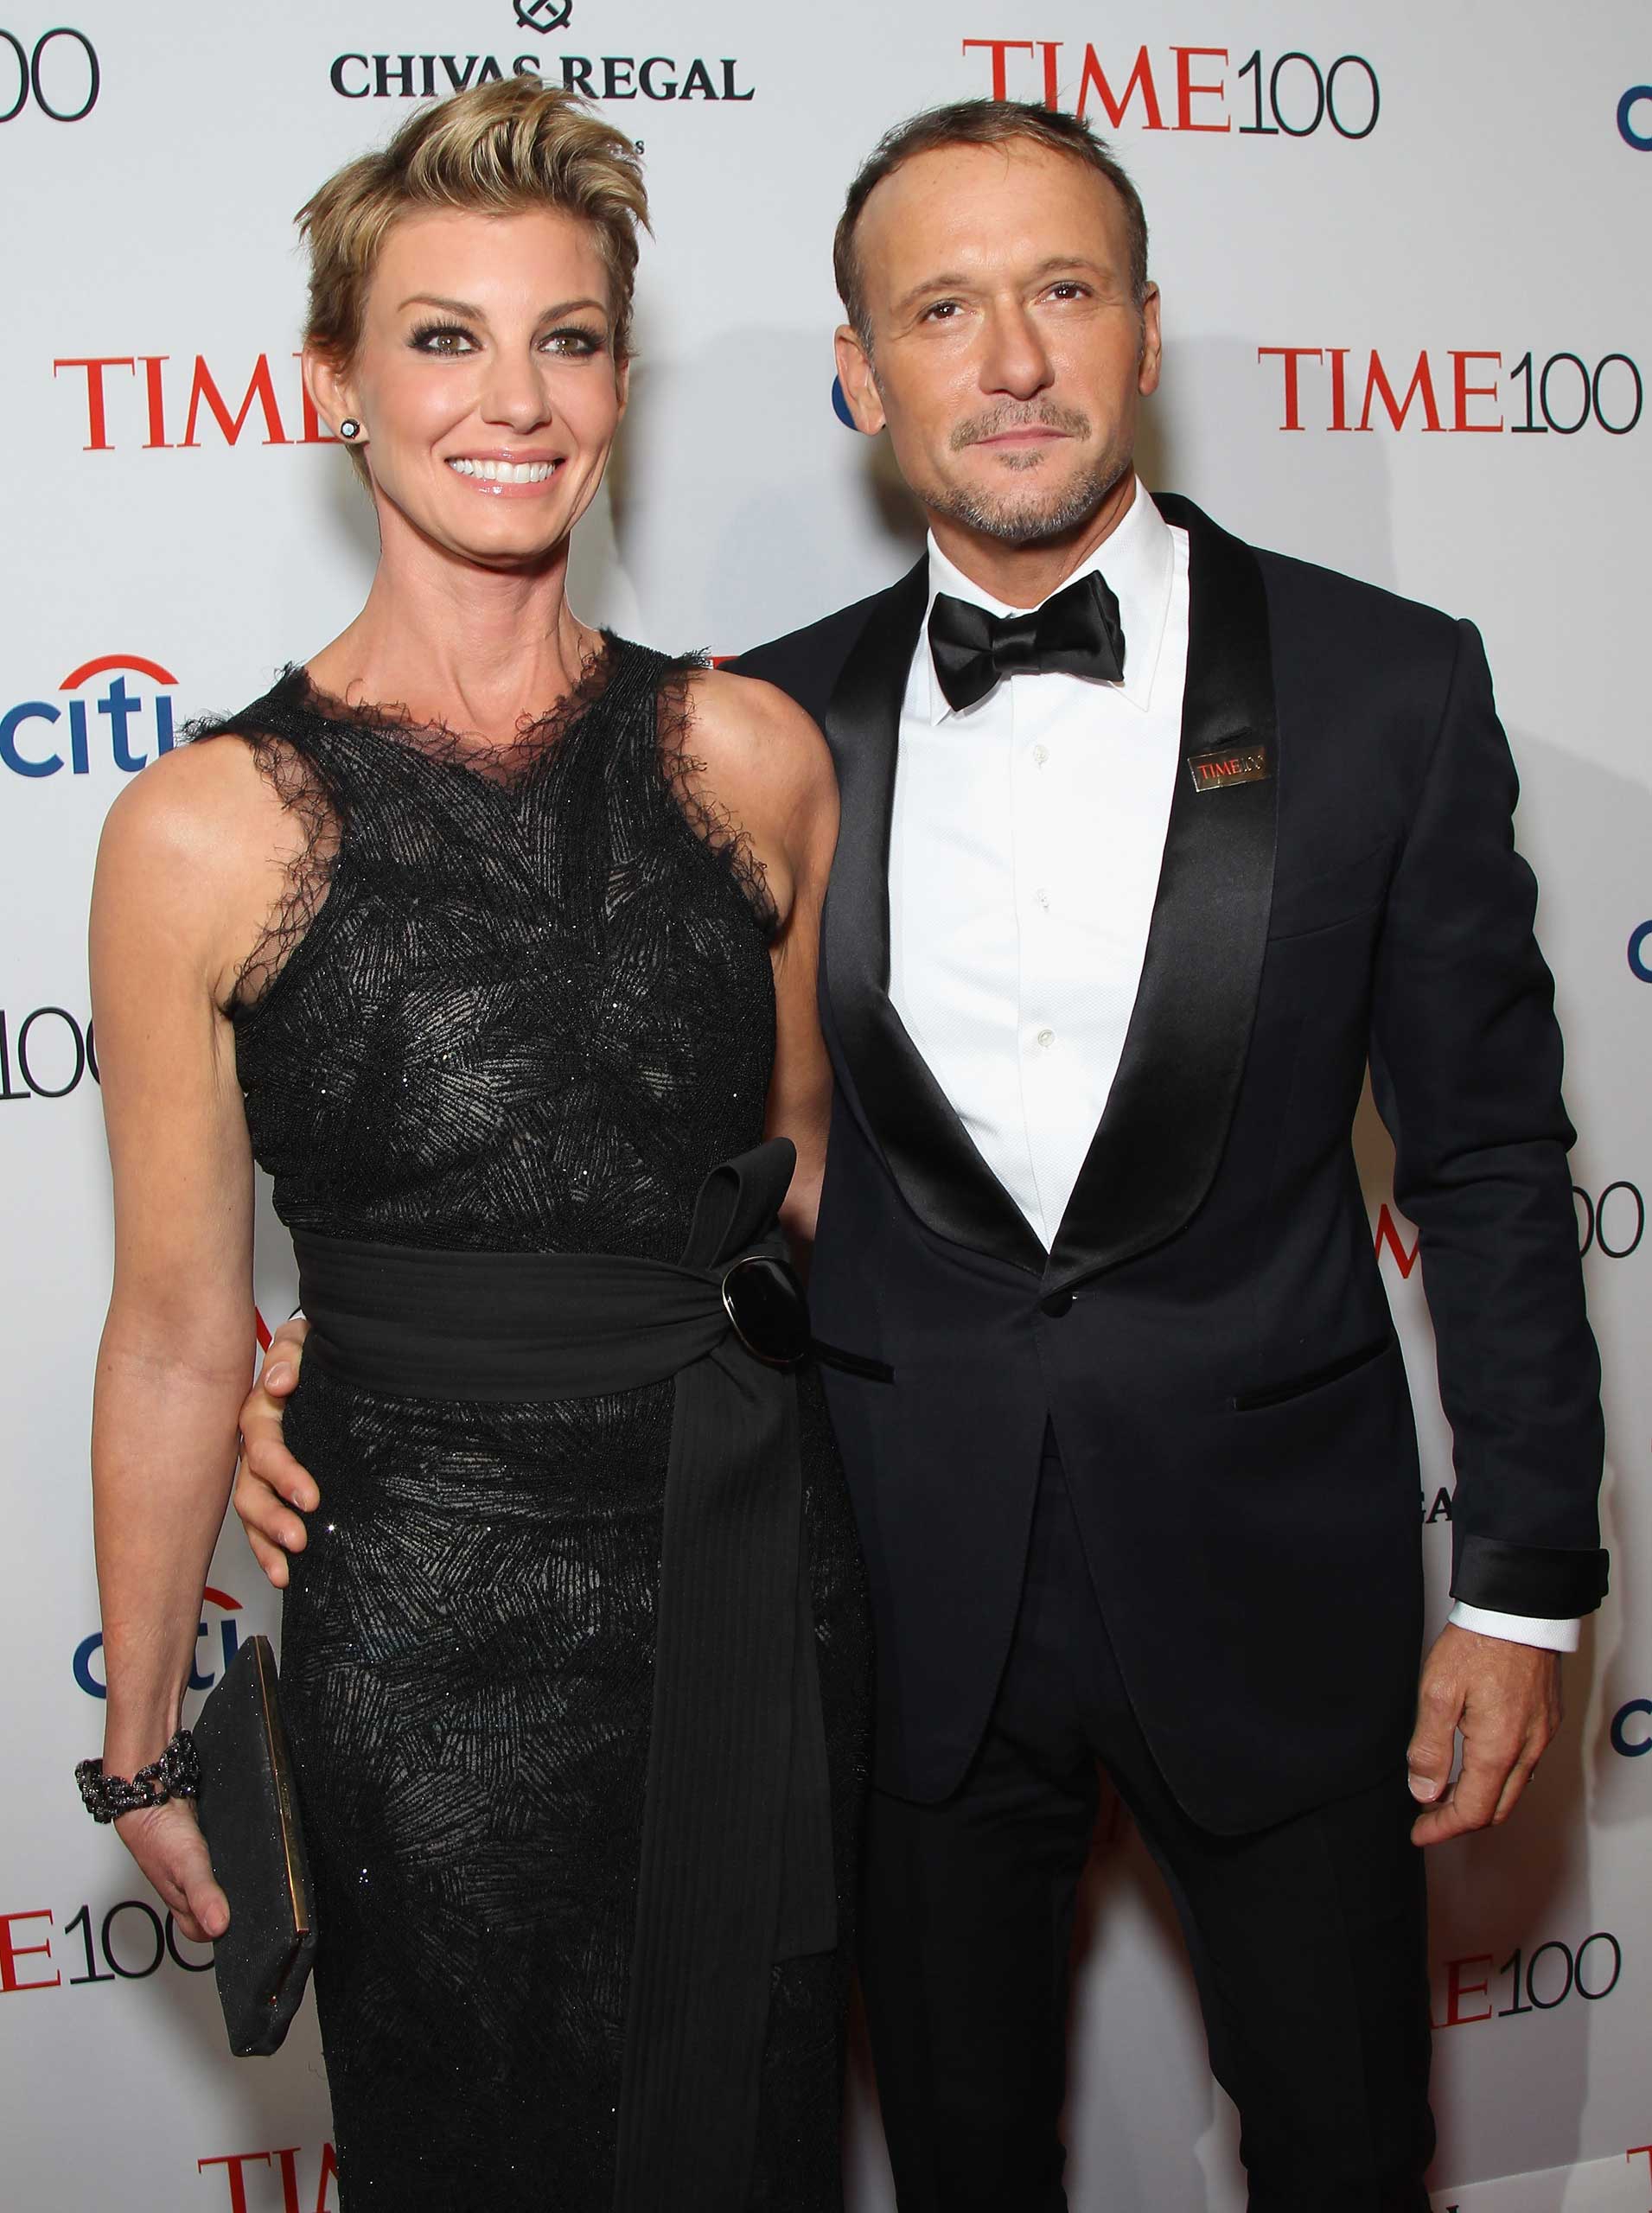 Faith Hill and Tim McGraw attend the TIME 100 Gala at Lincoln Center in New York City on Apr. 21, 2015.